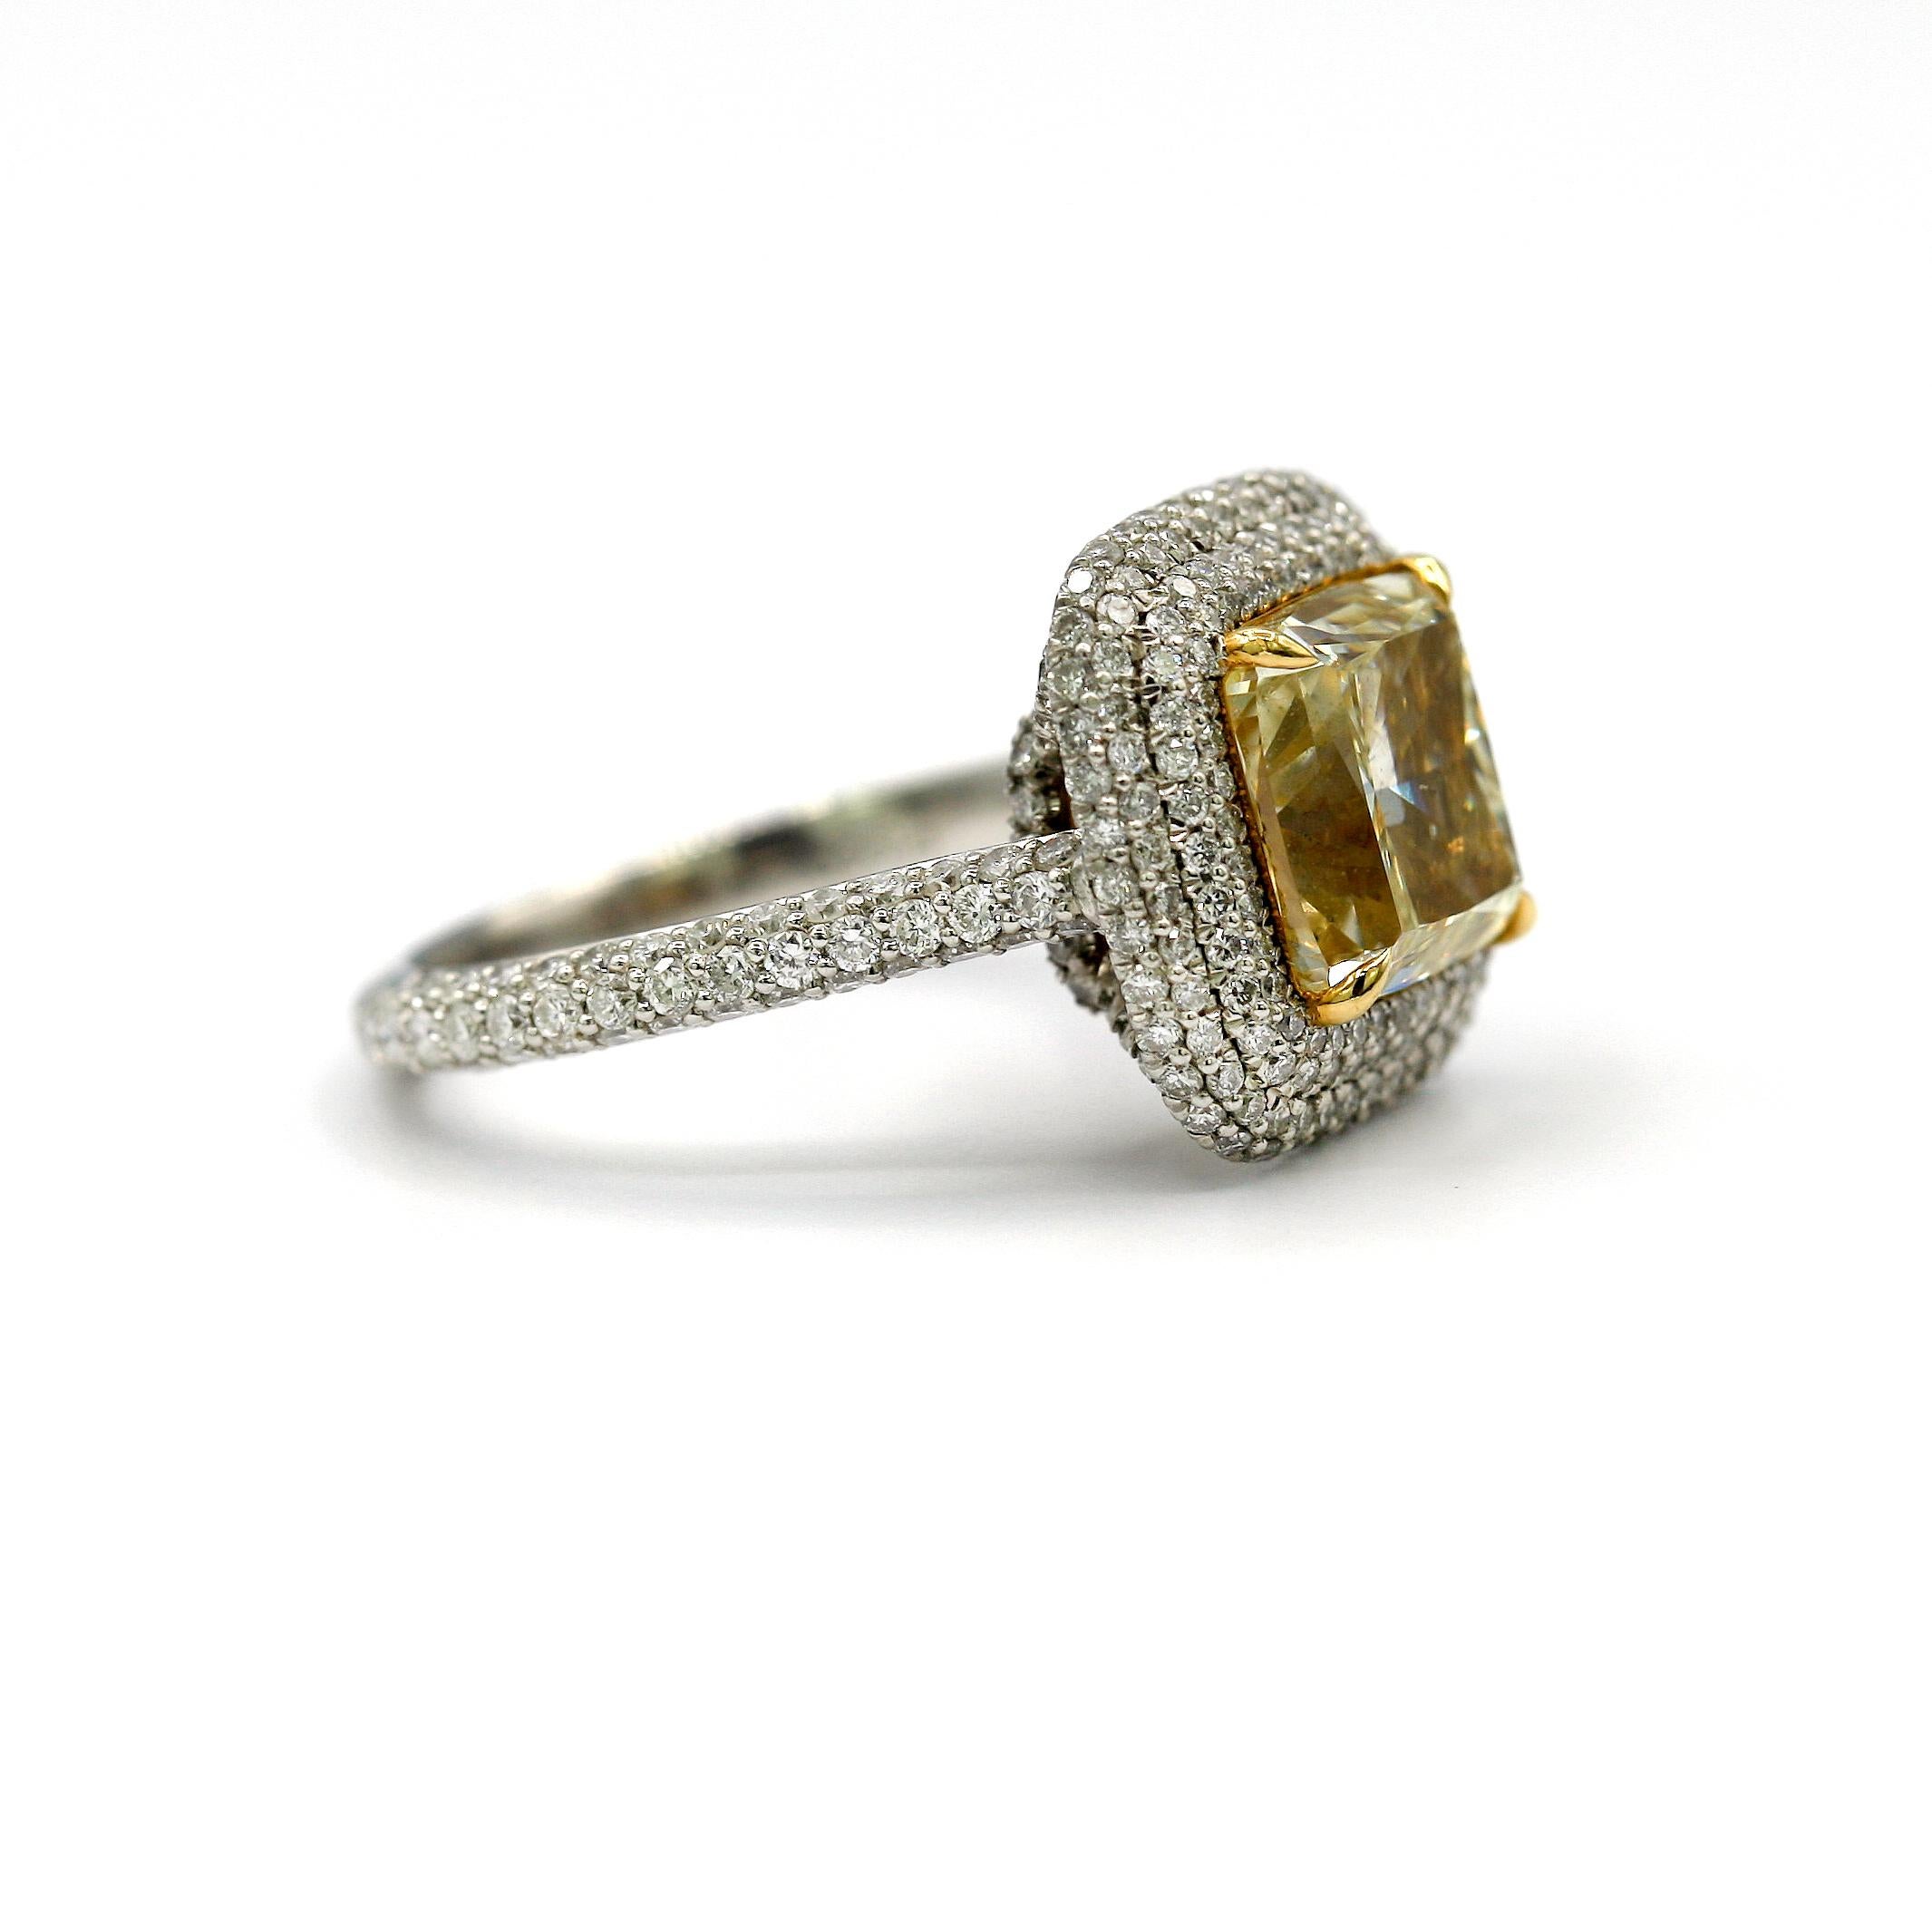 Cushion Cut 4.25 Carat EGL Fancy Light Yellow Cushion SI1 Diamond with Pave Platinum Ring For Sale